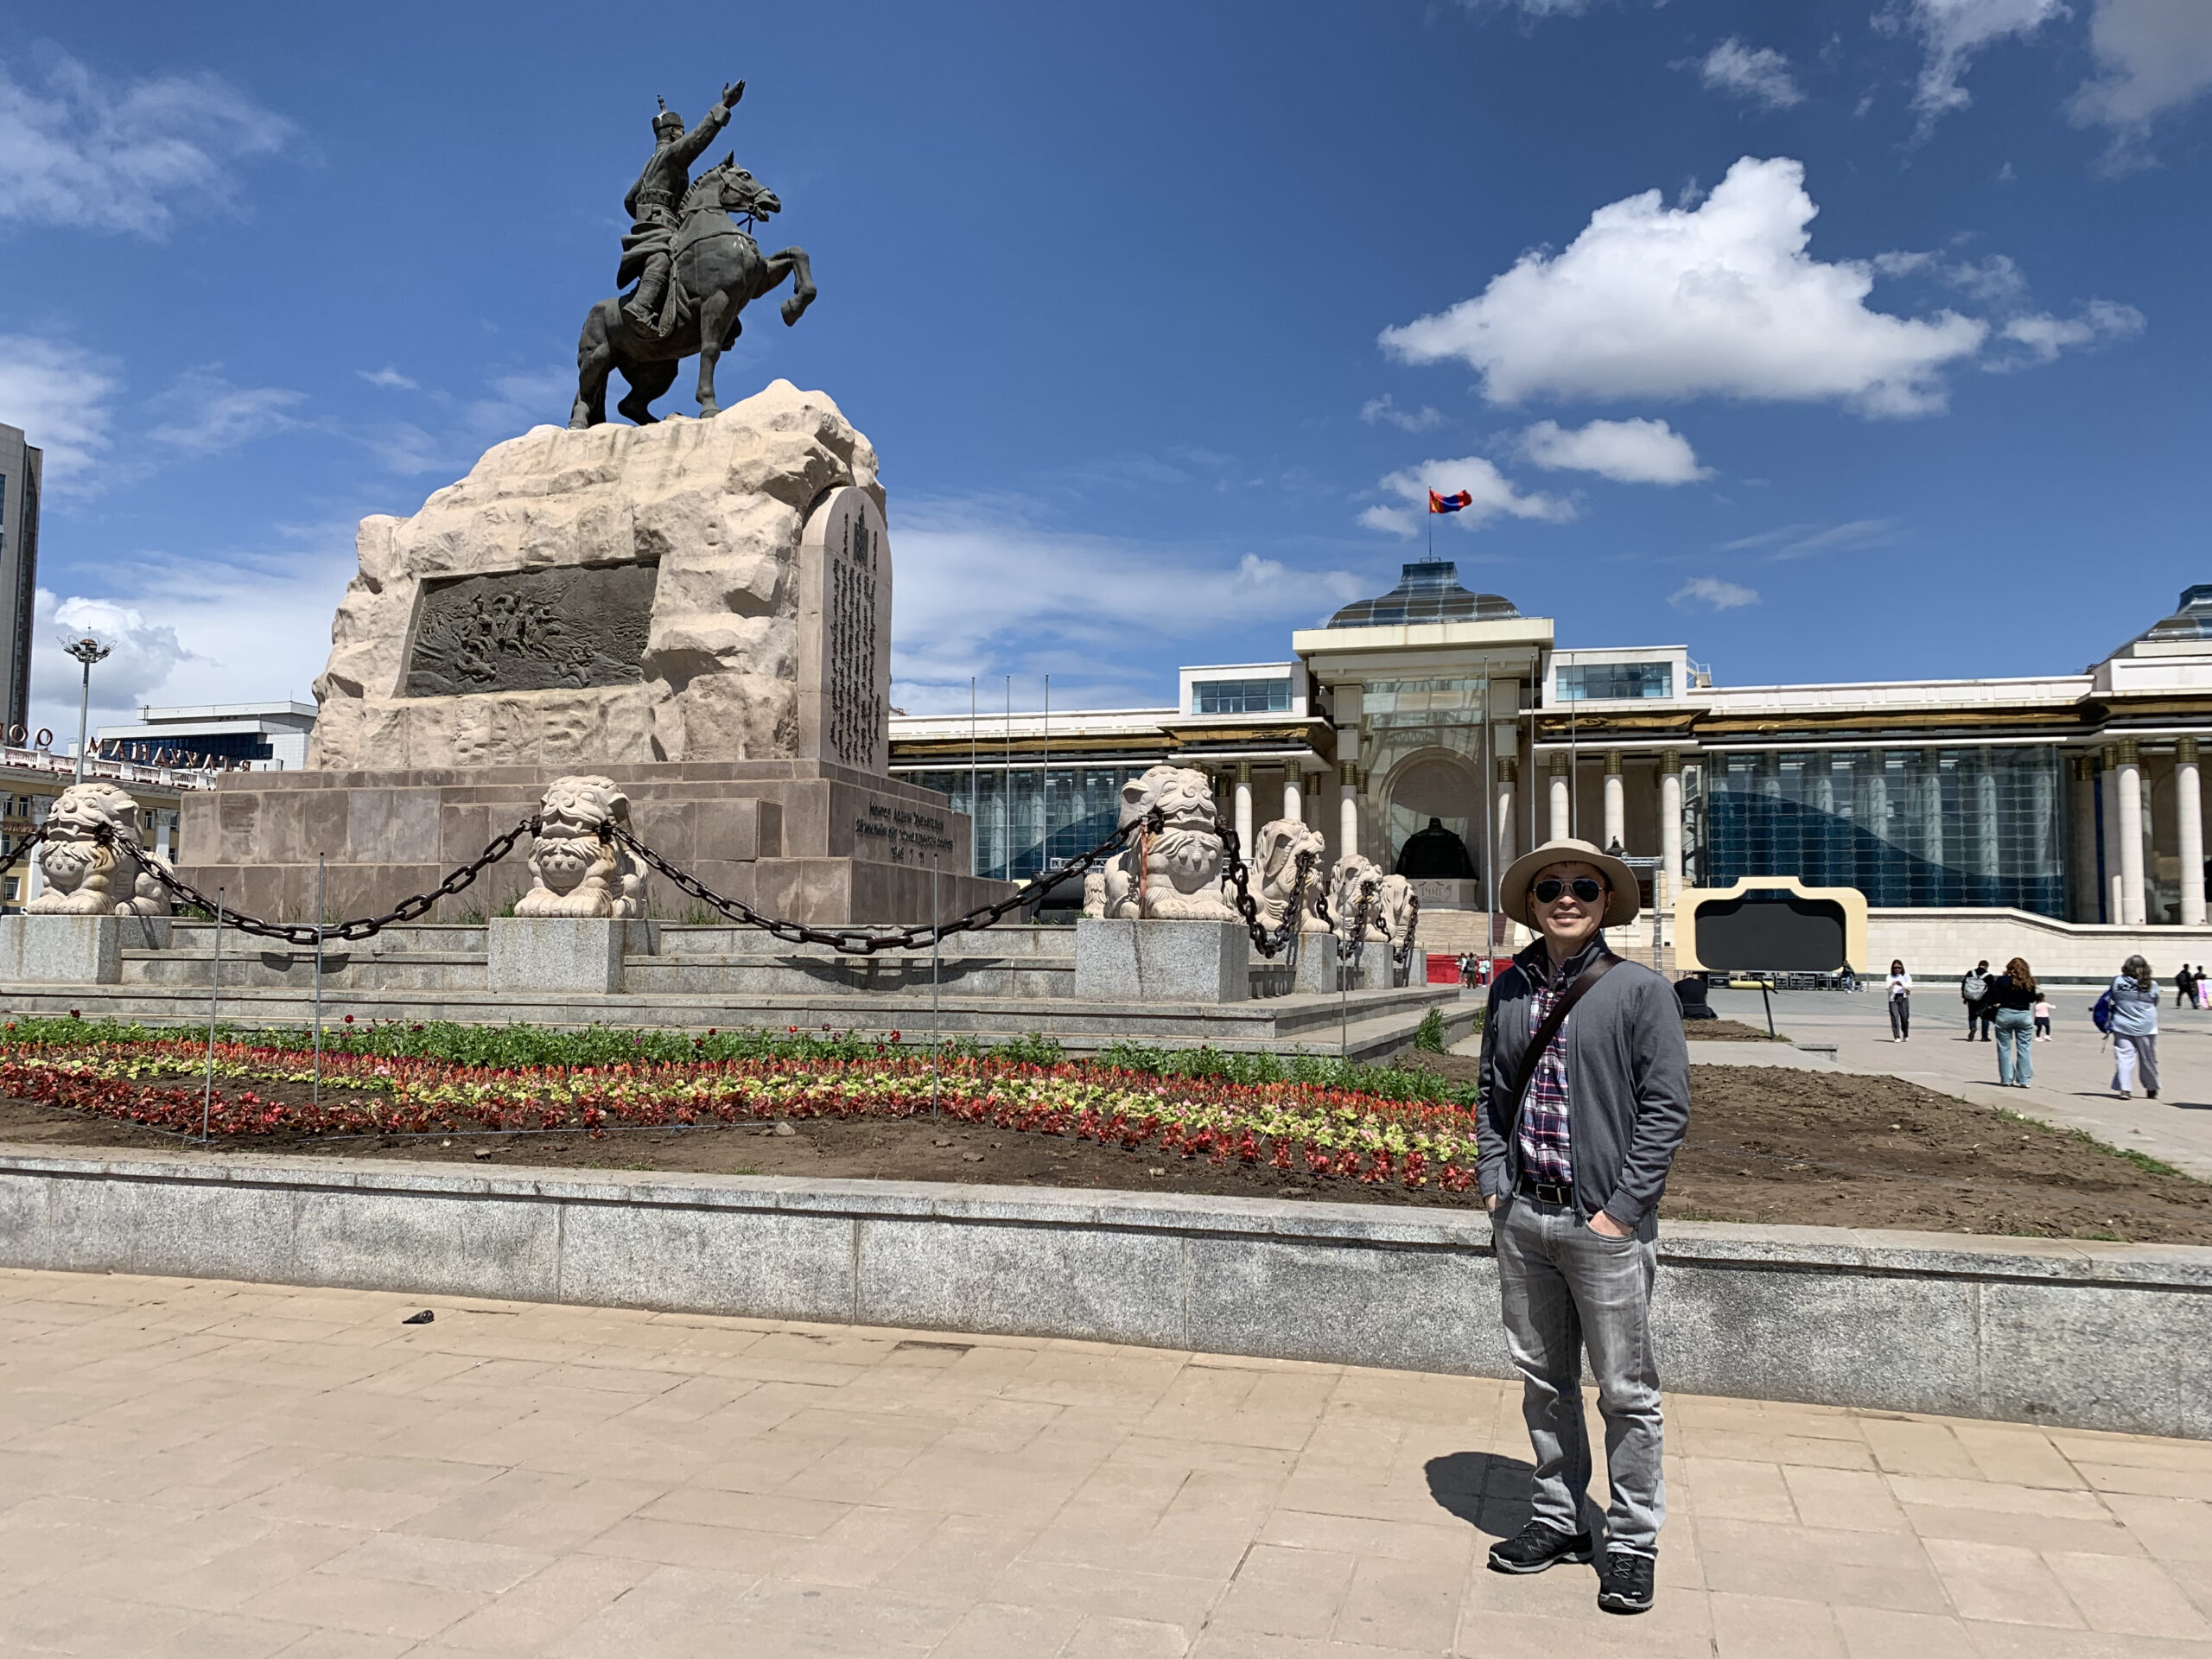 Christopher K. Tong, MLLI, returns from a research award in Mongolia to inform his work in Asian studies